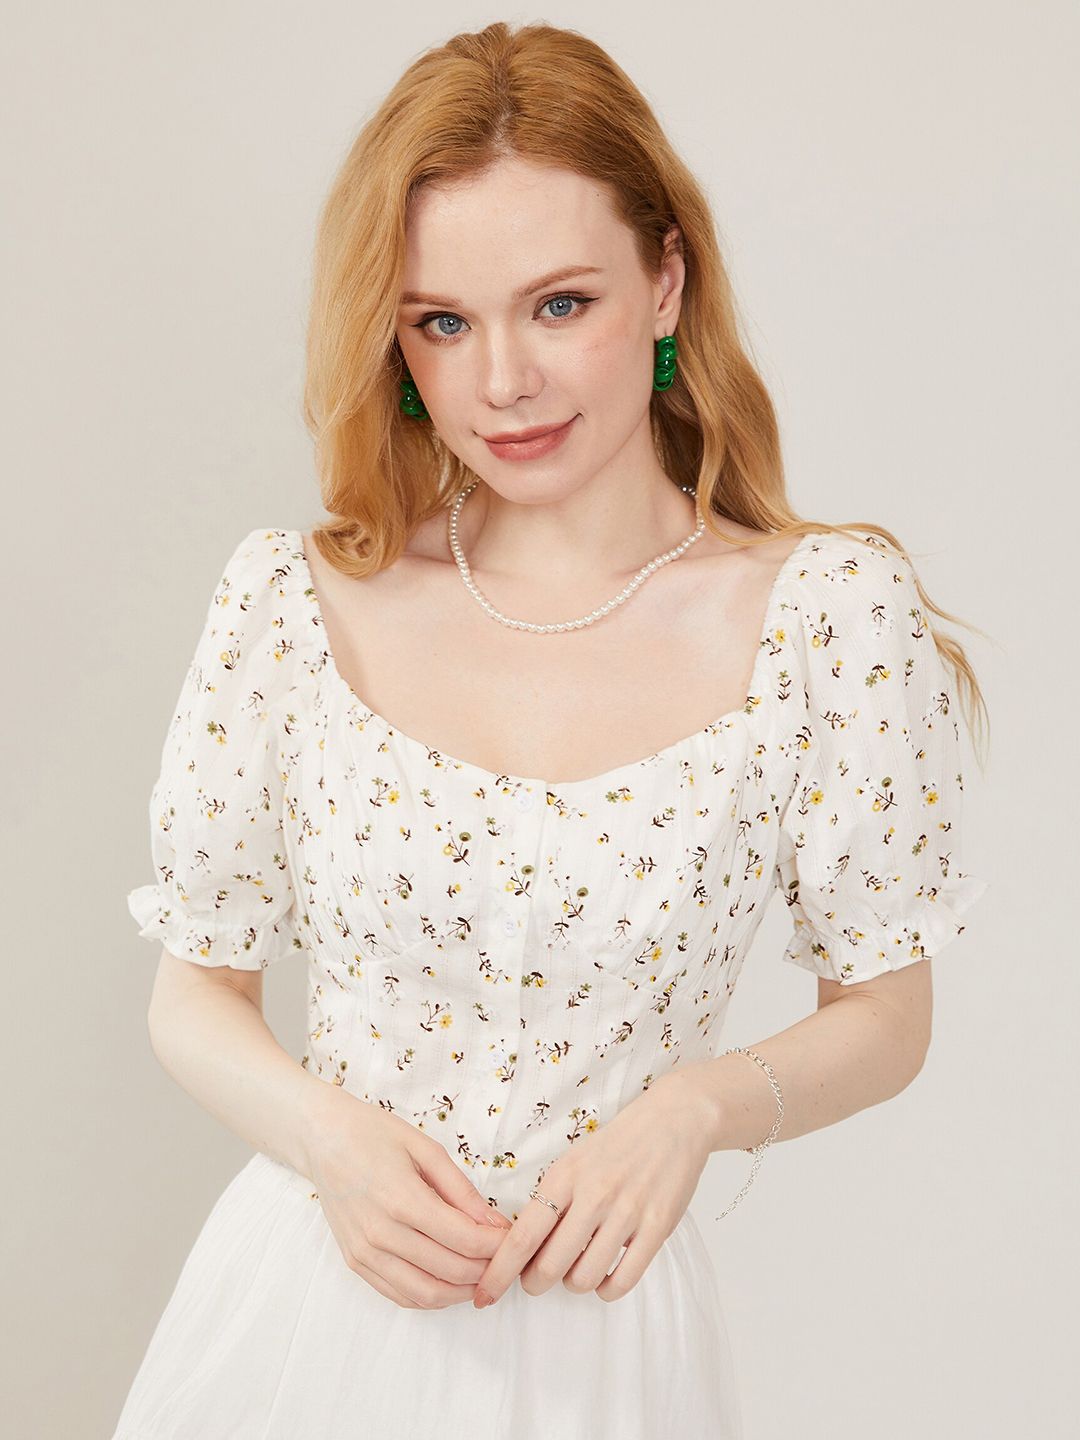 URBANIC White Floral Print Extended Sleeves Top Price in India